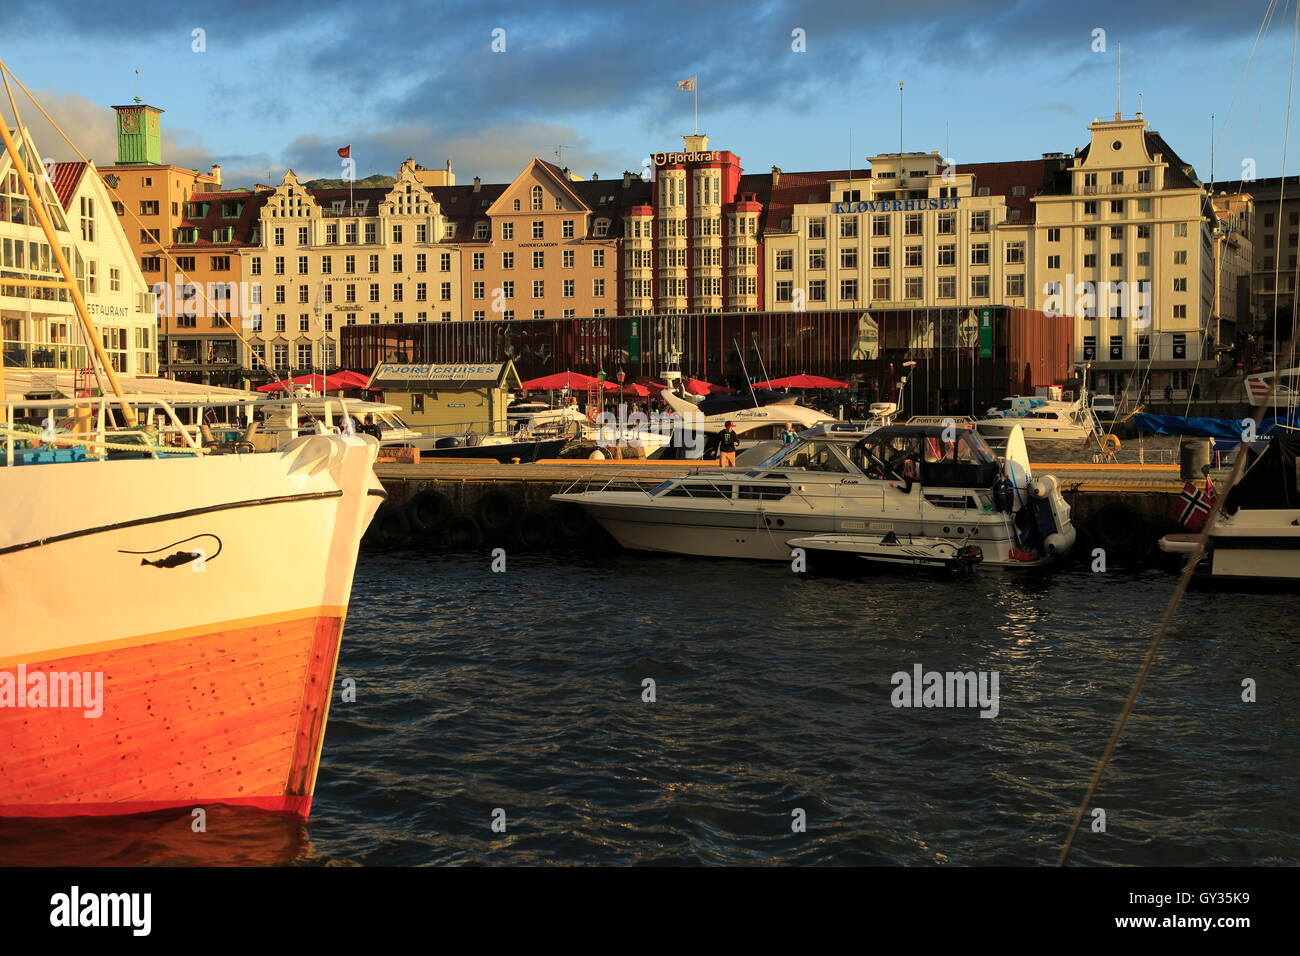 Sailing yachts and historic buildings evening light, Vagen harbour, Bergen, Norway Stock Photo